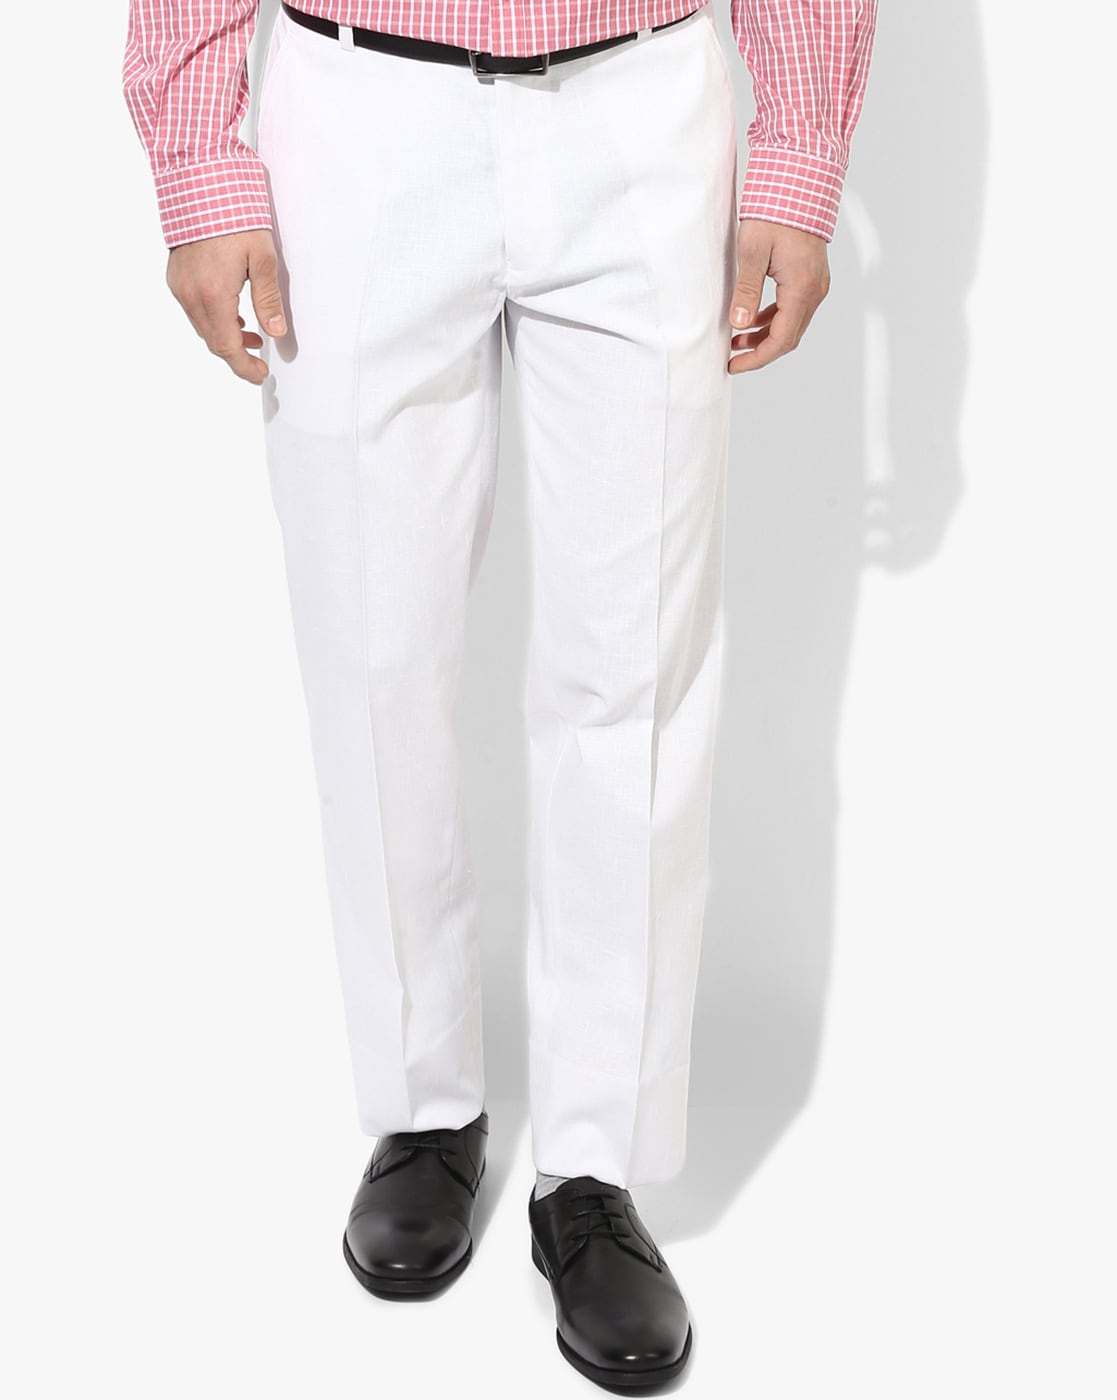 Buy White Trousers  Pants for Men by hangup Online  Ajiocom